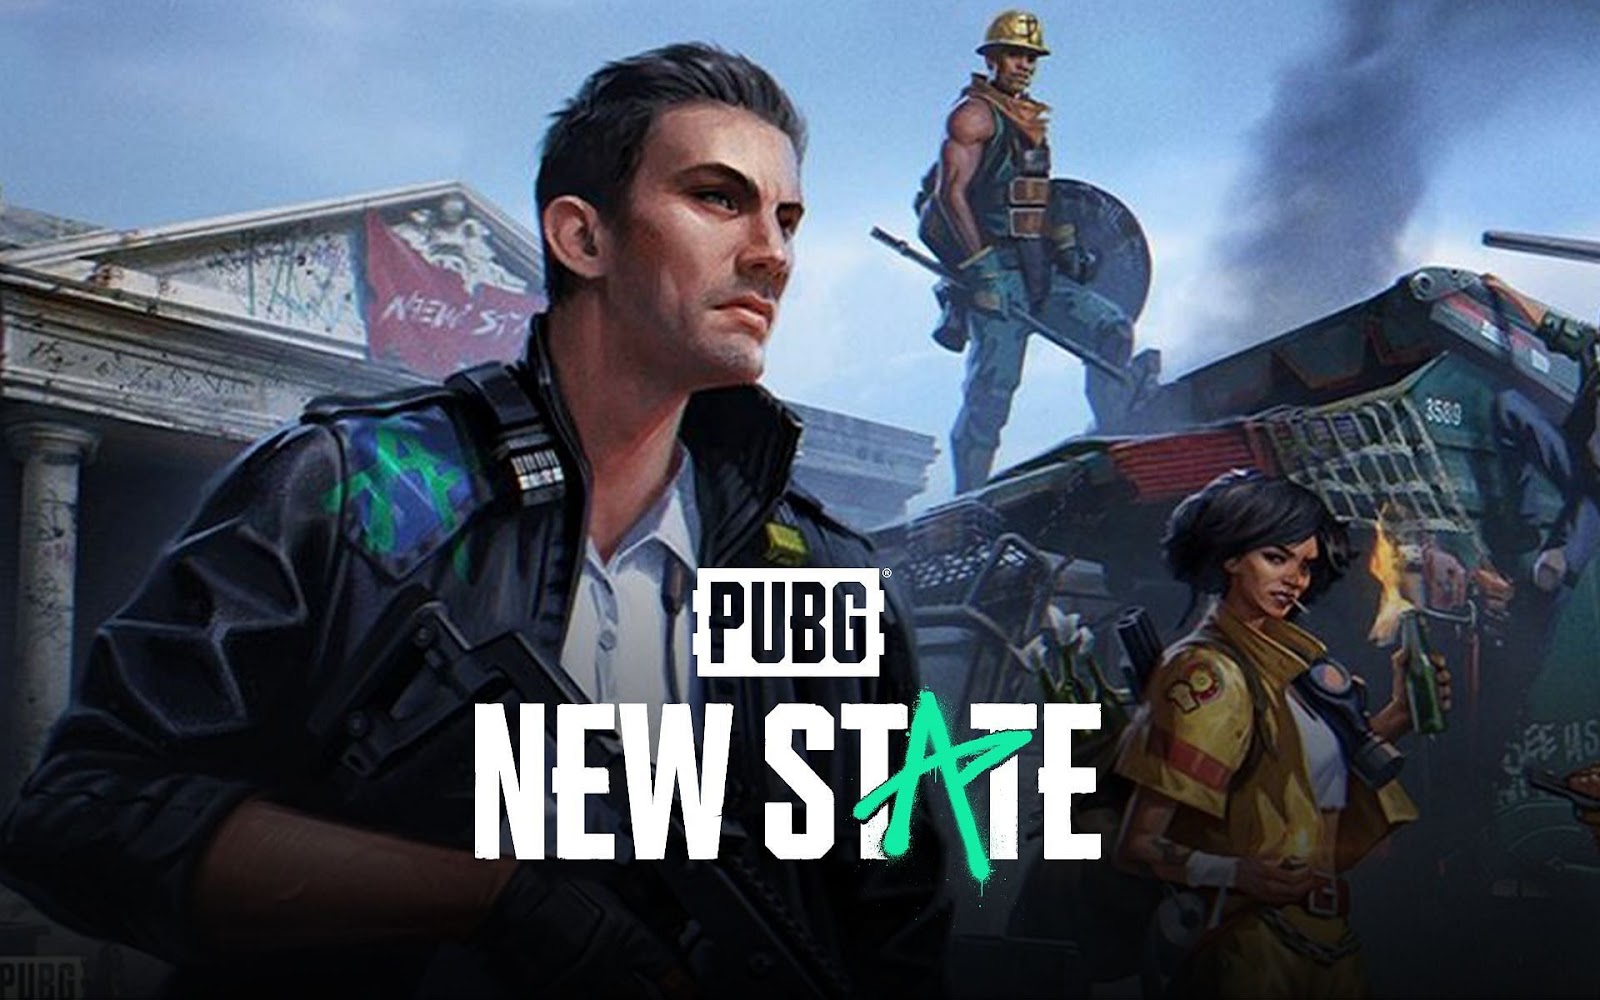 PUBG NEW STATE: Latest News, Updates on New State Edition